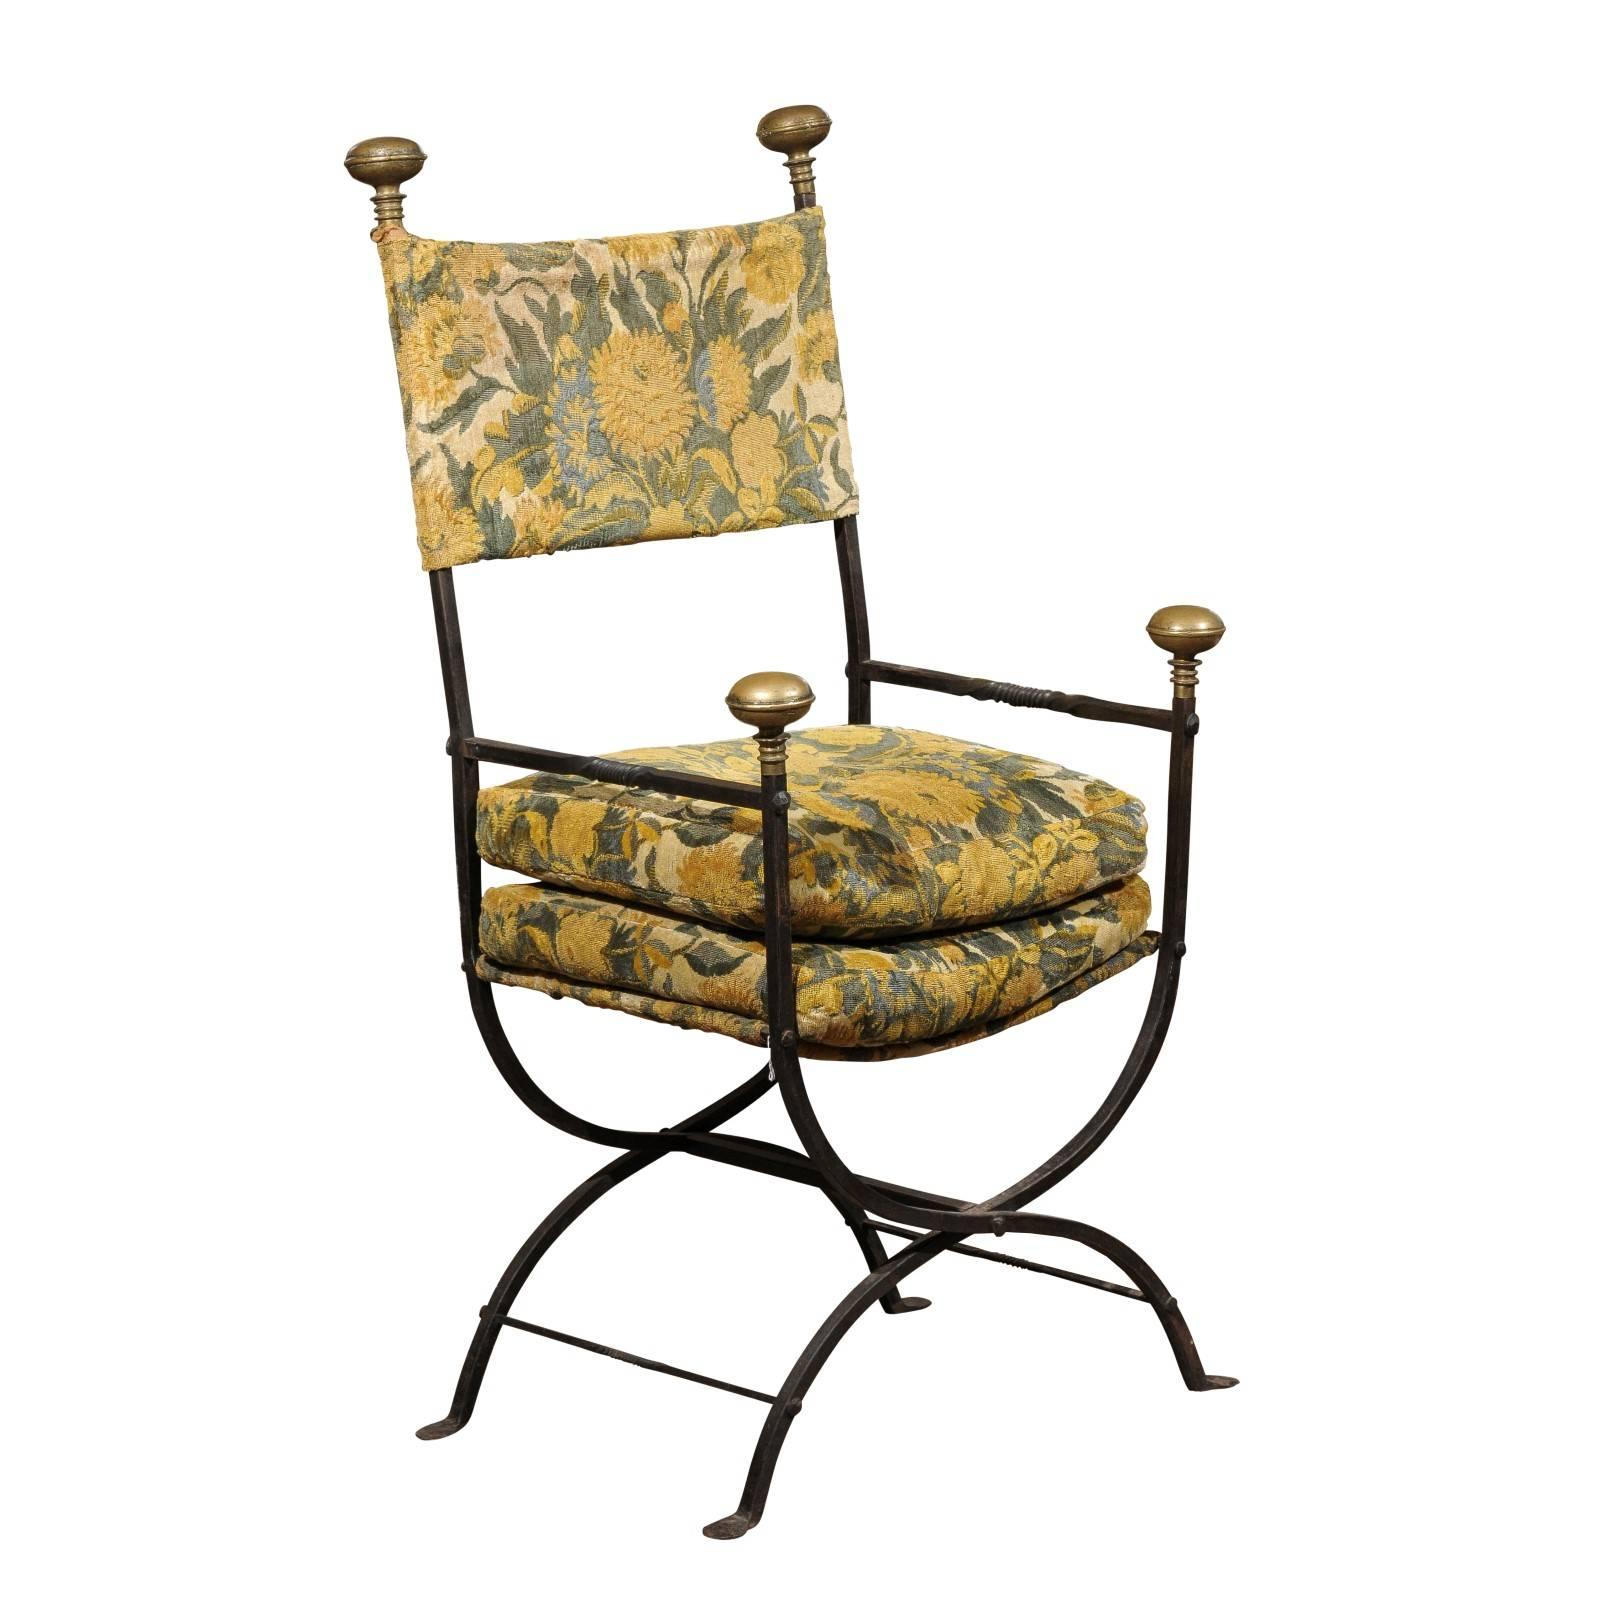 Large 19th Century Iron and Brass Campaign Chair, circa 1850 For Sale